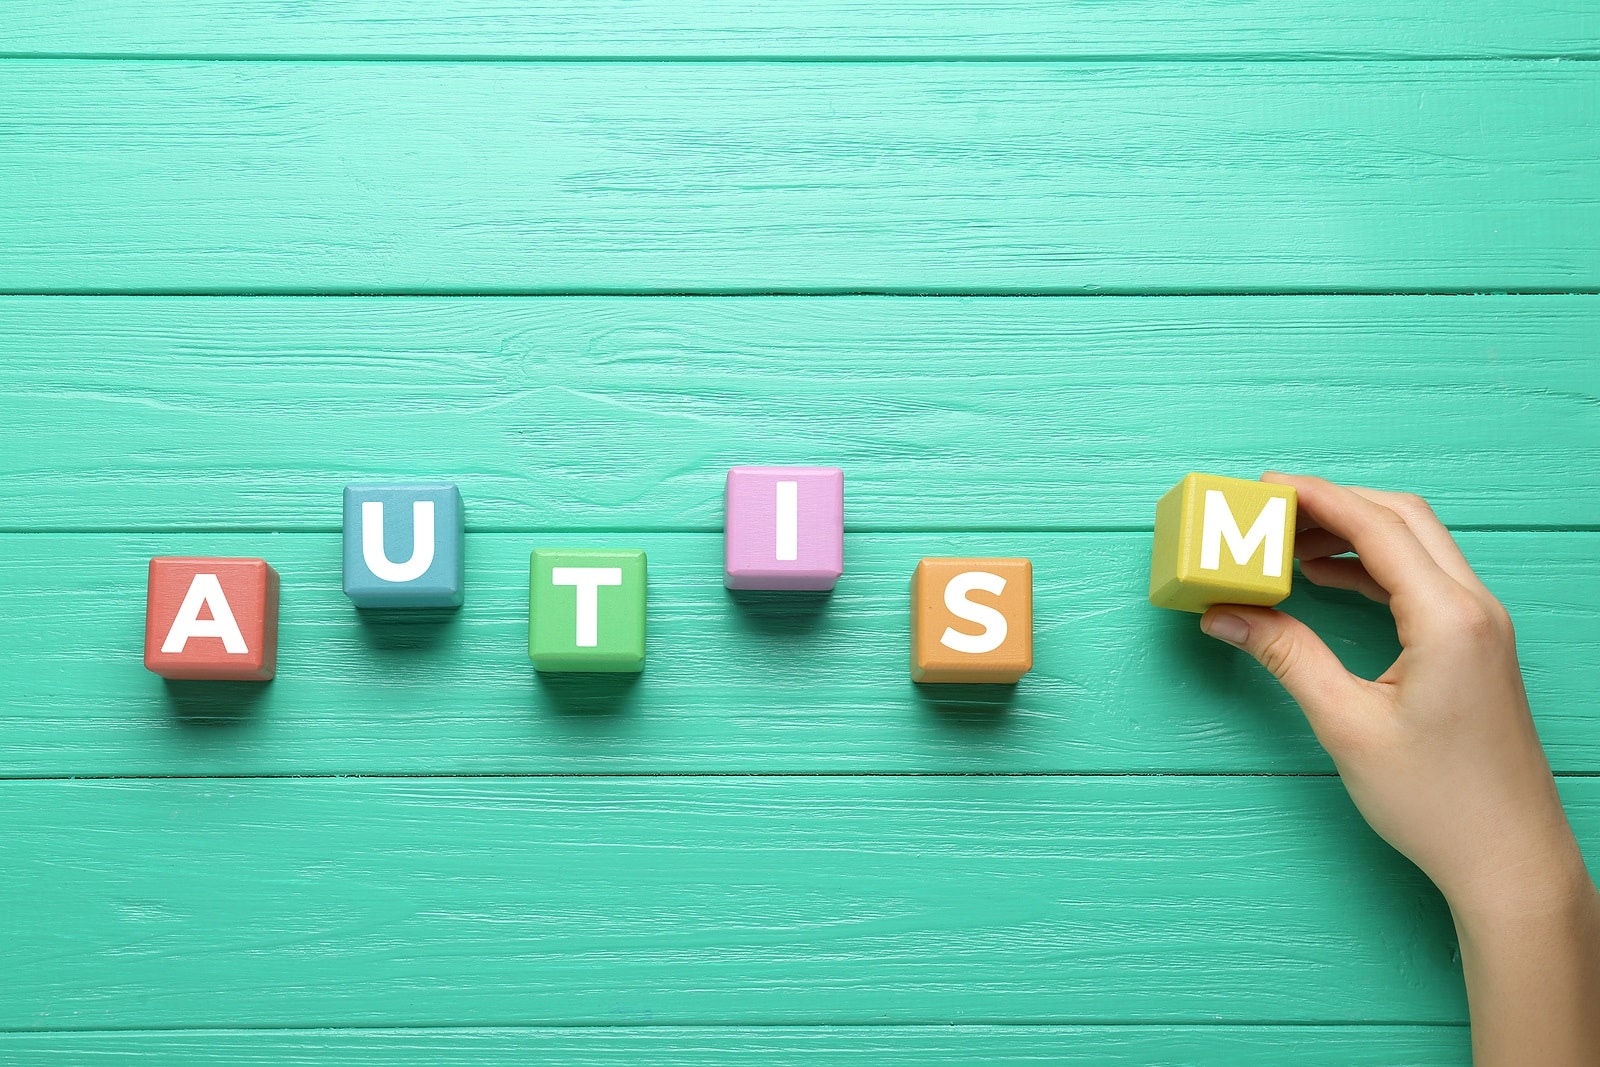 ‘Autism is lifelong:’ Advocates say new law expanding autism coverage to adults will make a difference